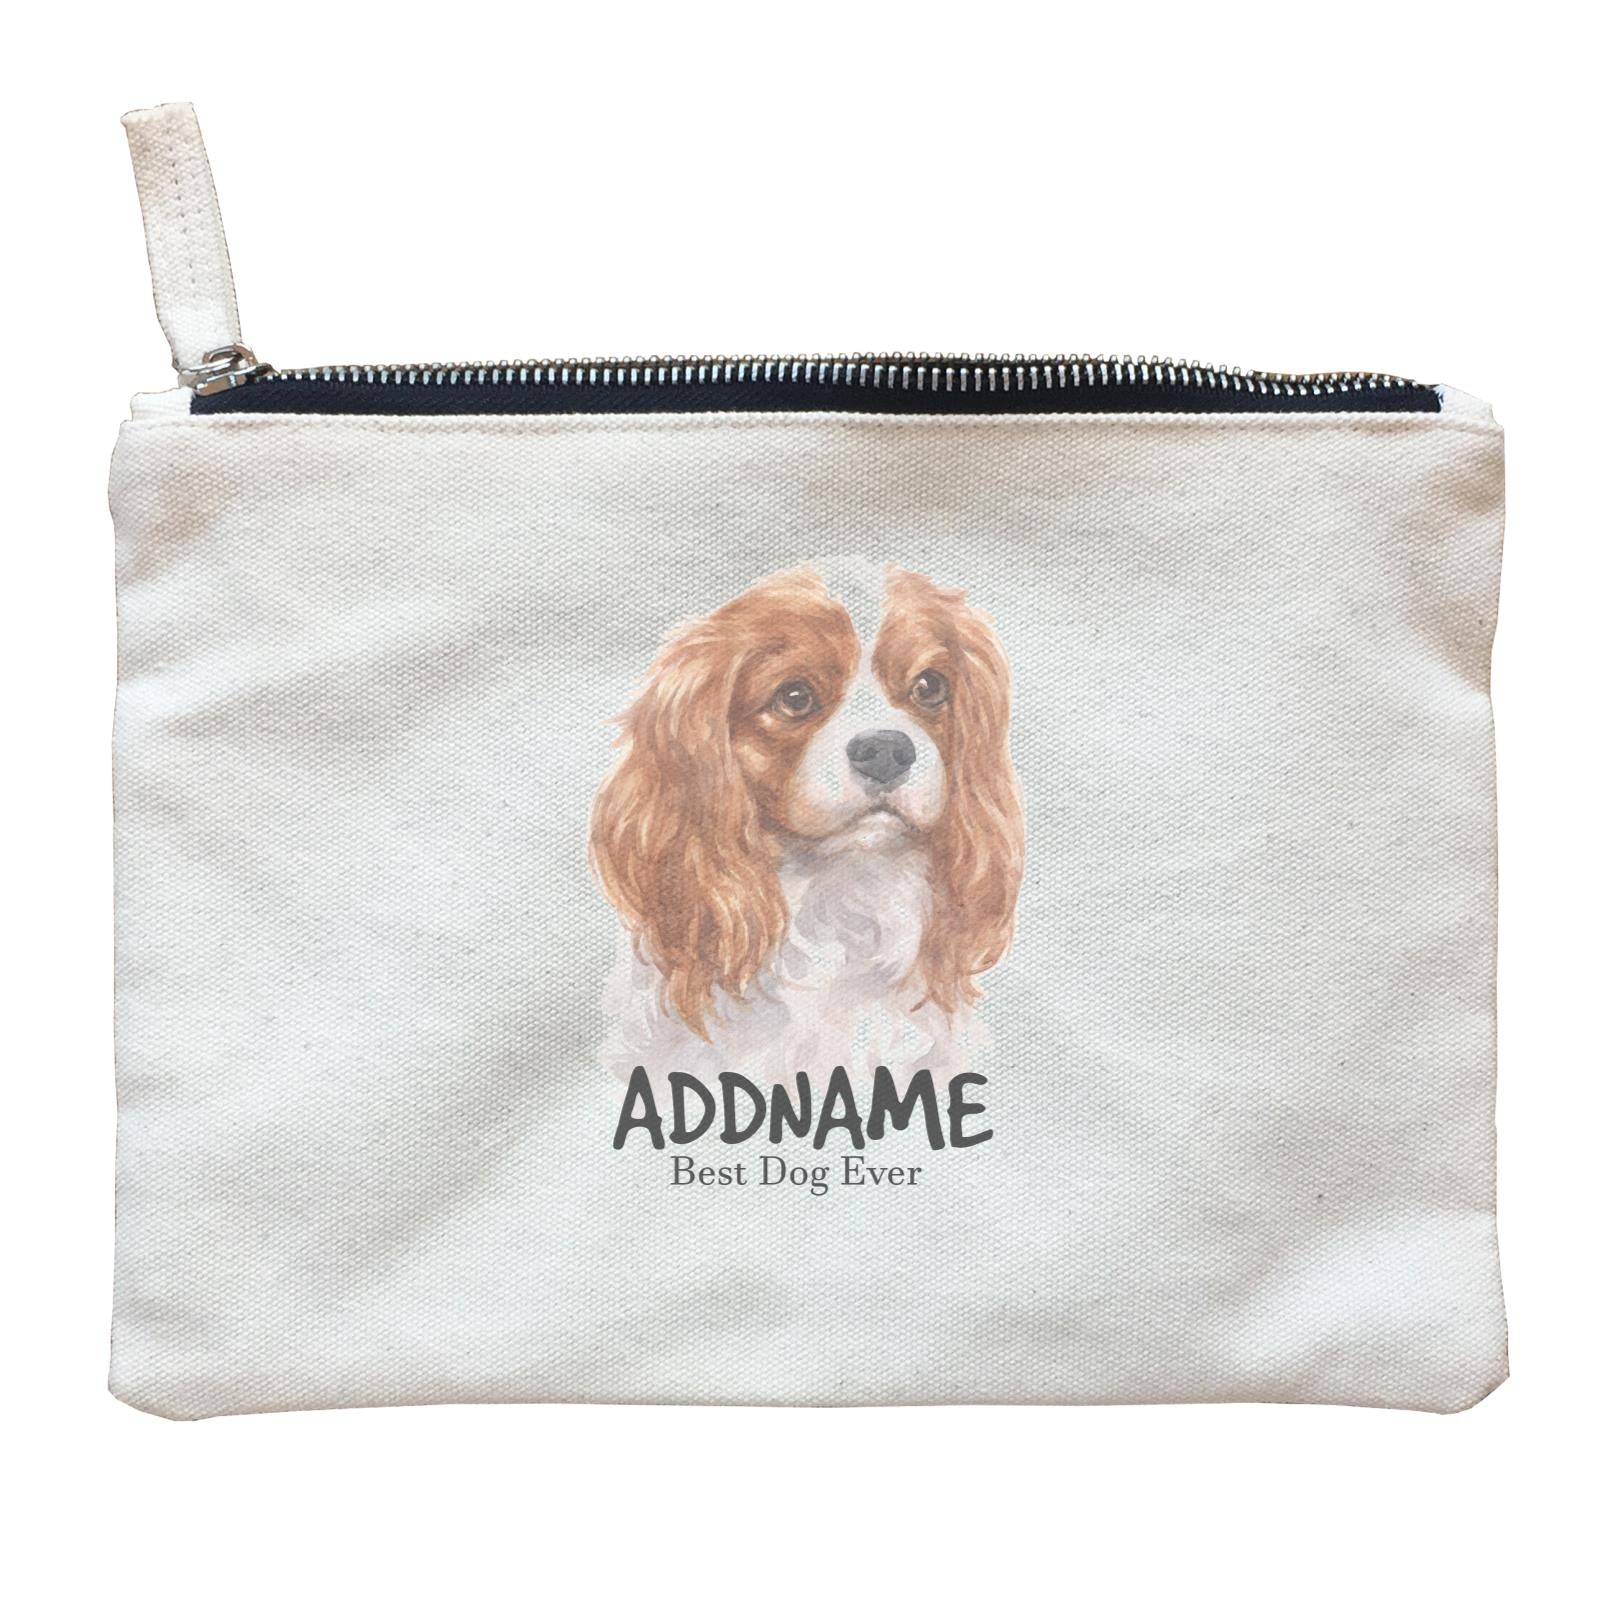 Watercolor Dog King Charles Spaniel Curly Best Dog Ever Addname Zipper Pouch